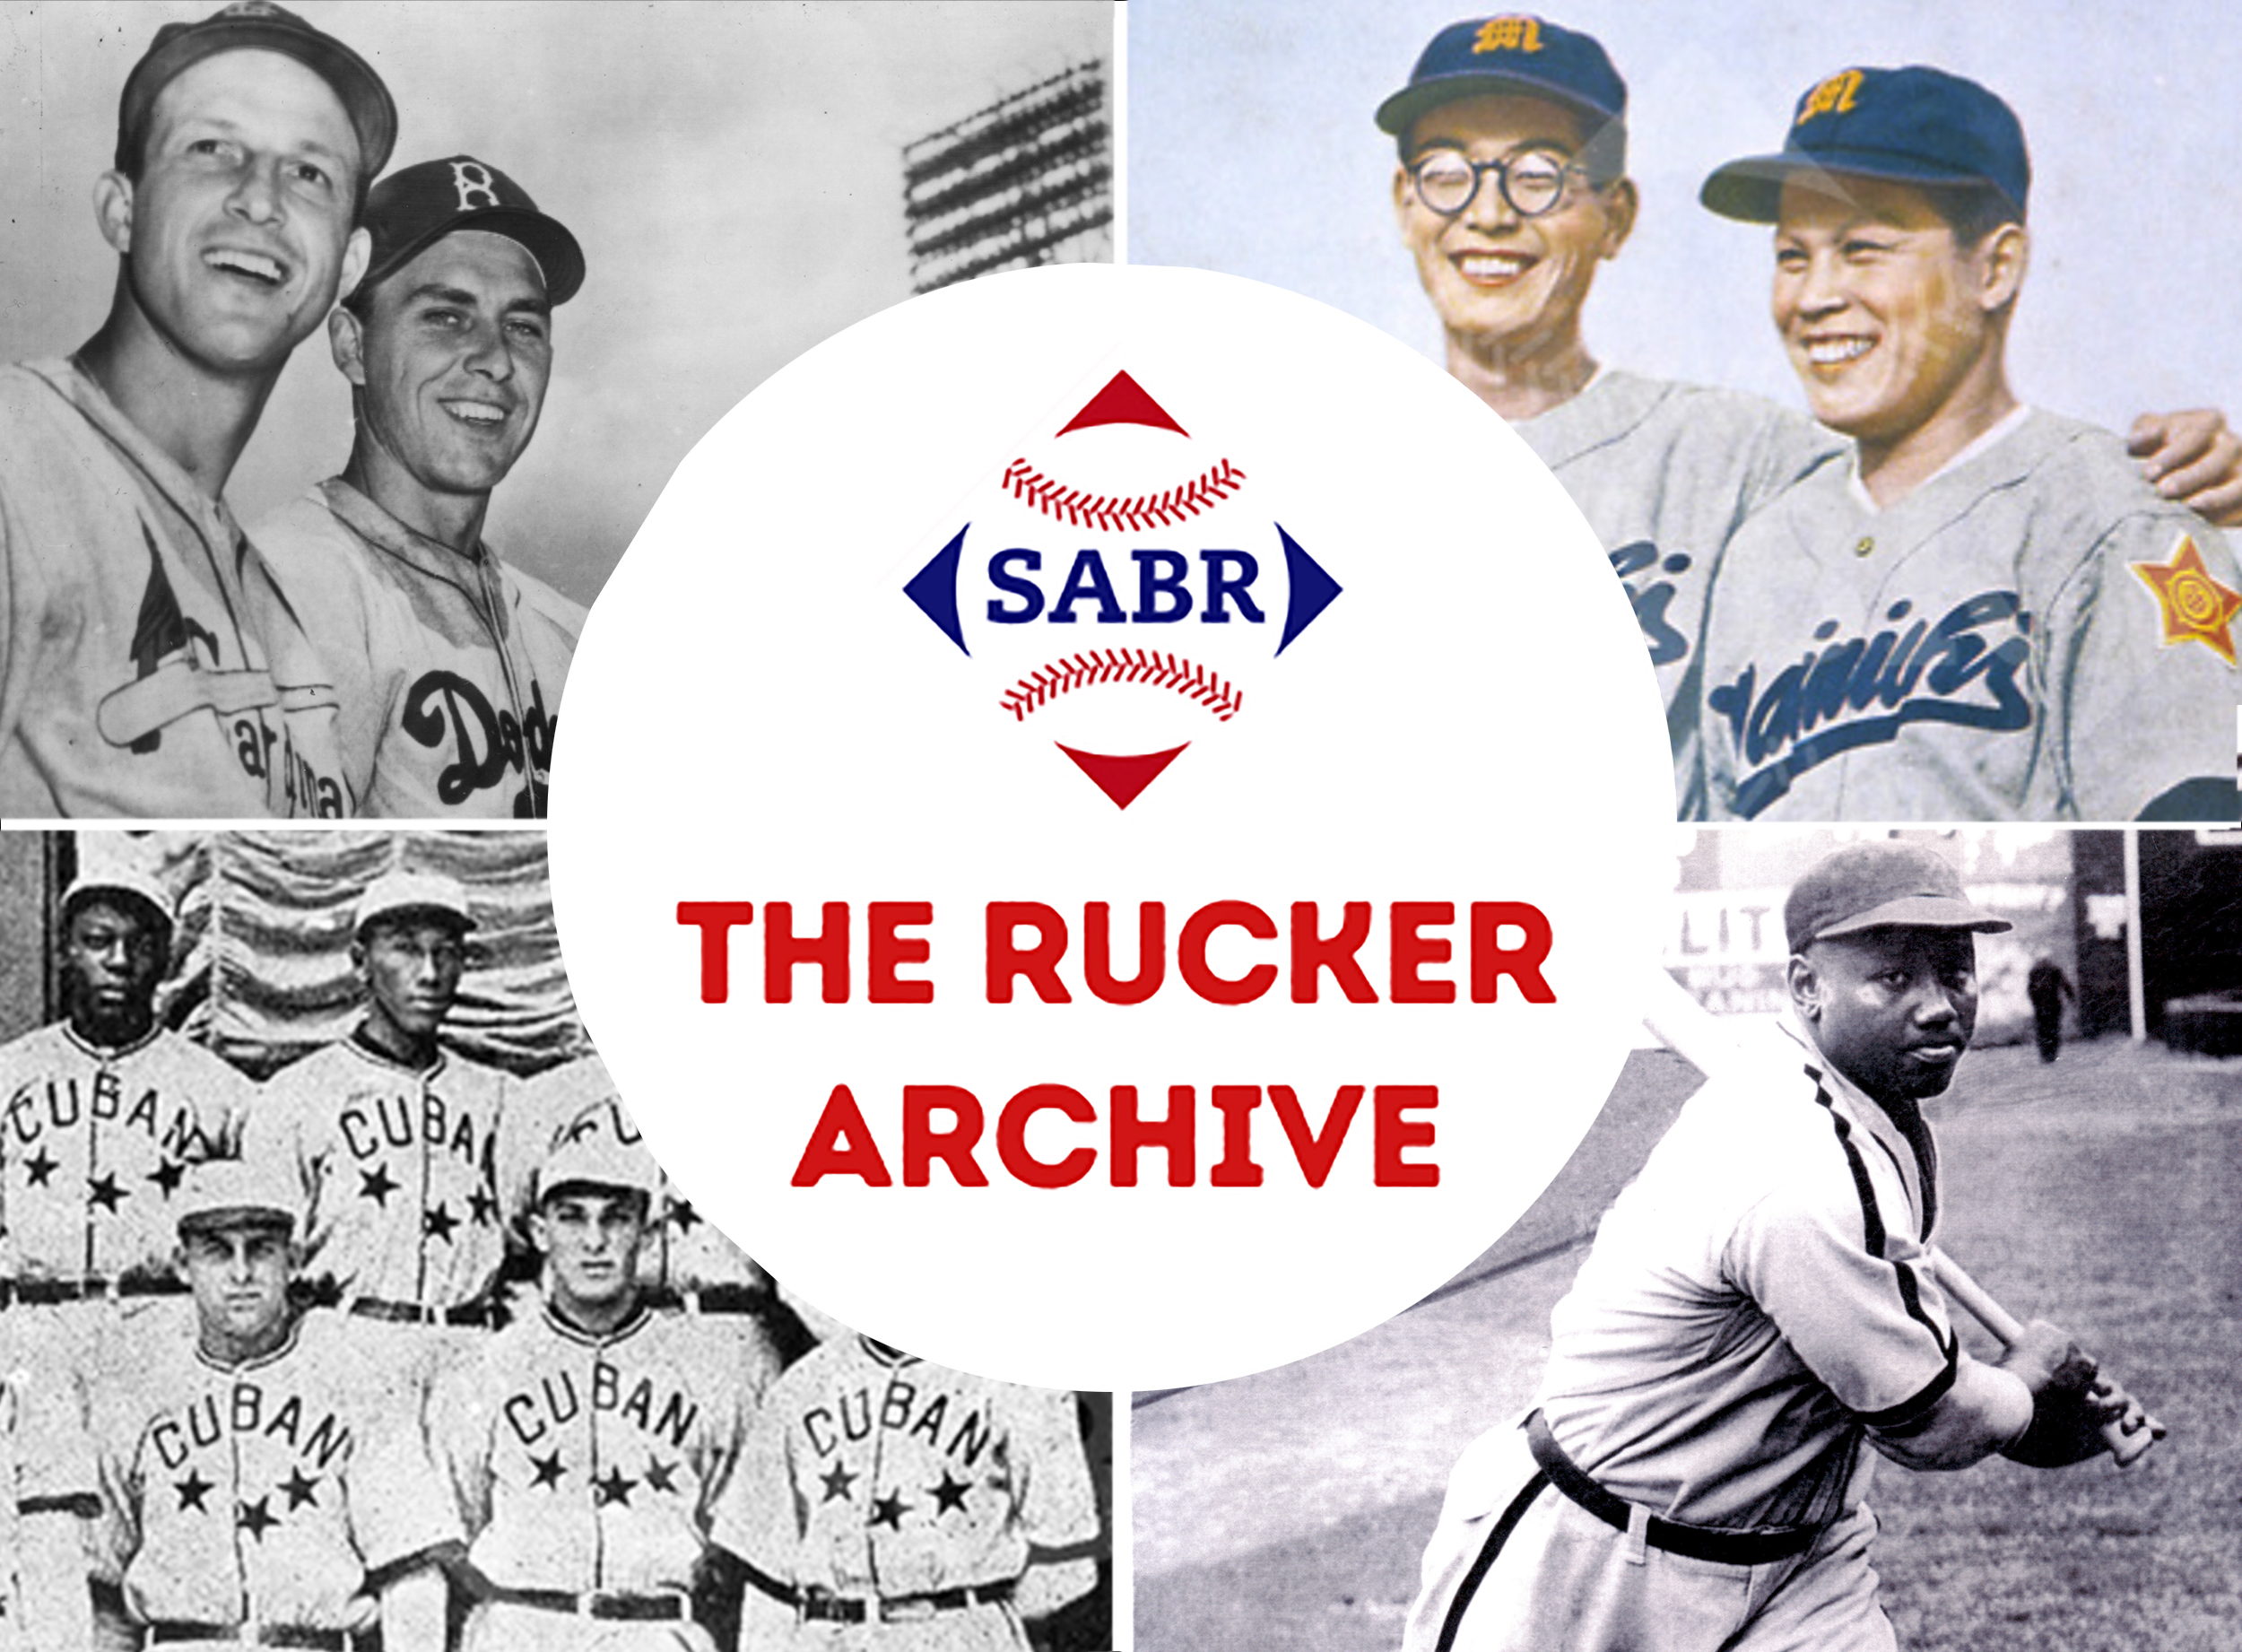 SABR-Rucker Archive (clockwise from top-left): Stan Musial and Gil Hodges, two Japanese players, Josh Gibson, a Cuban baseball team